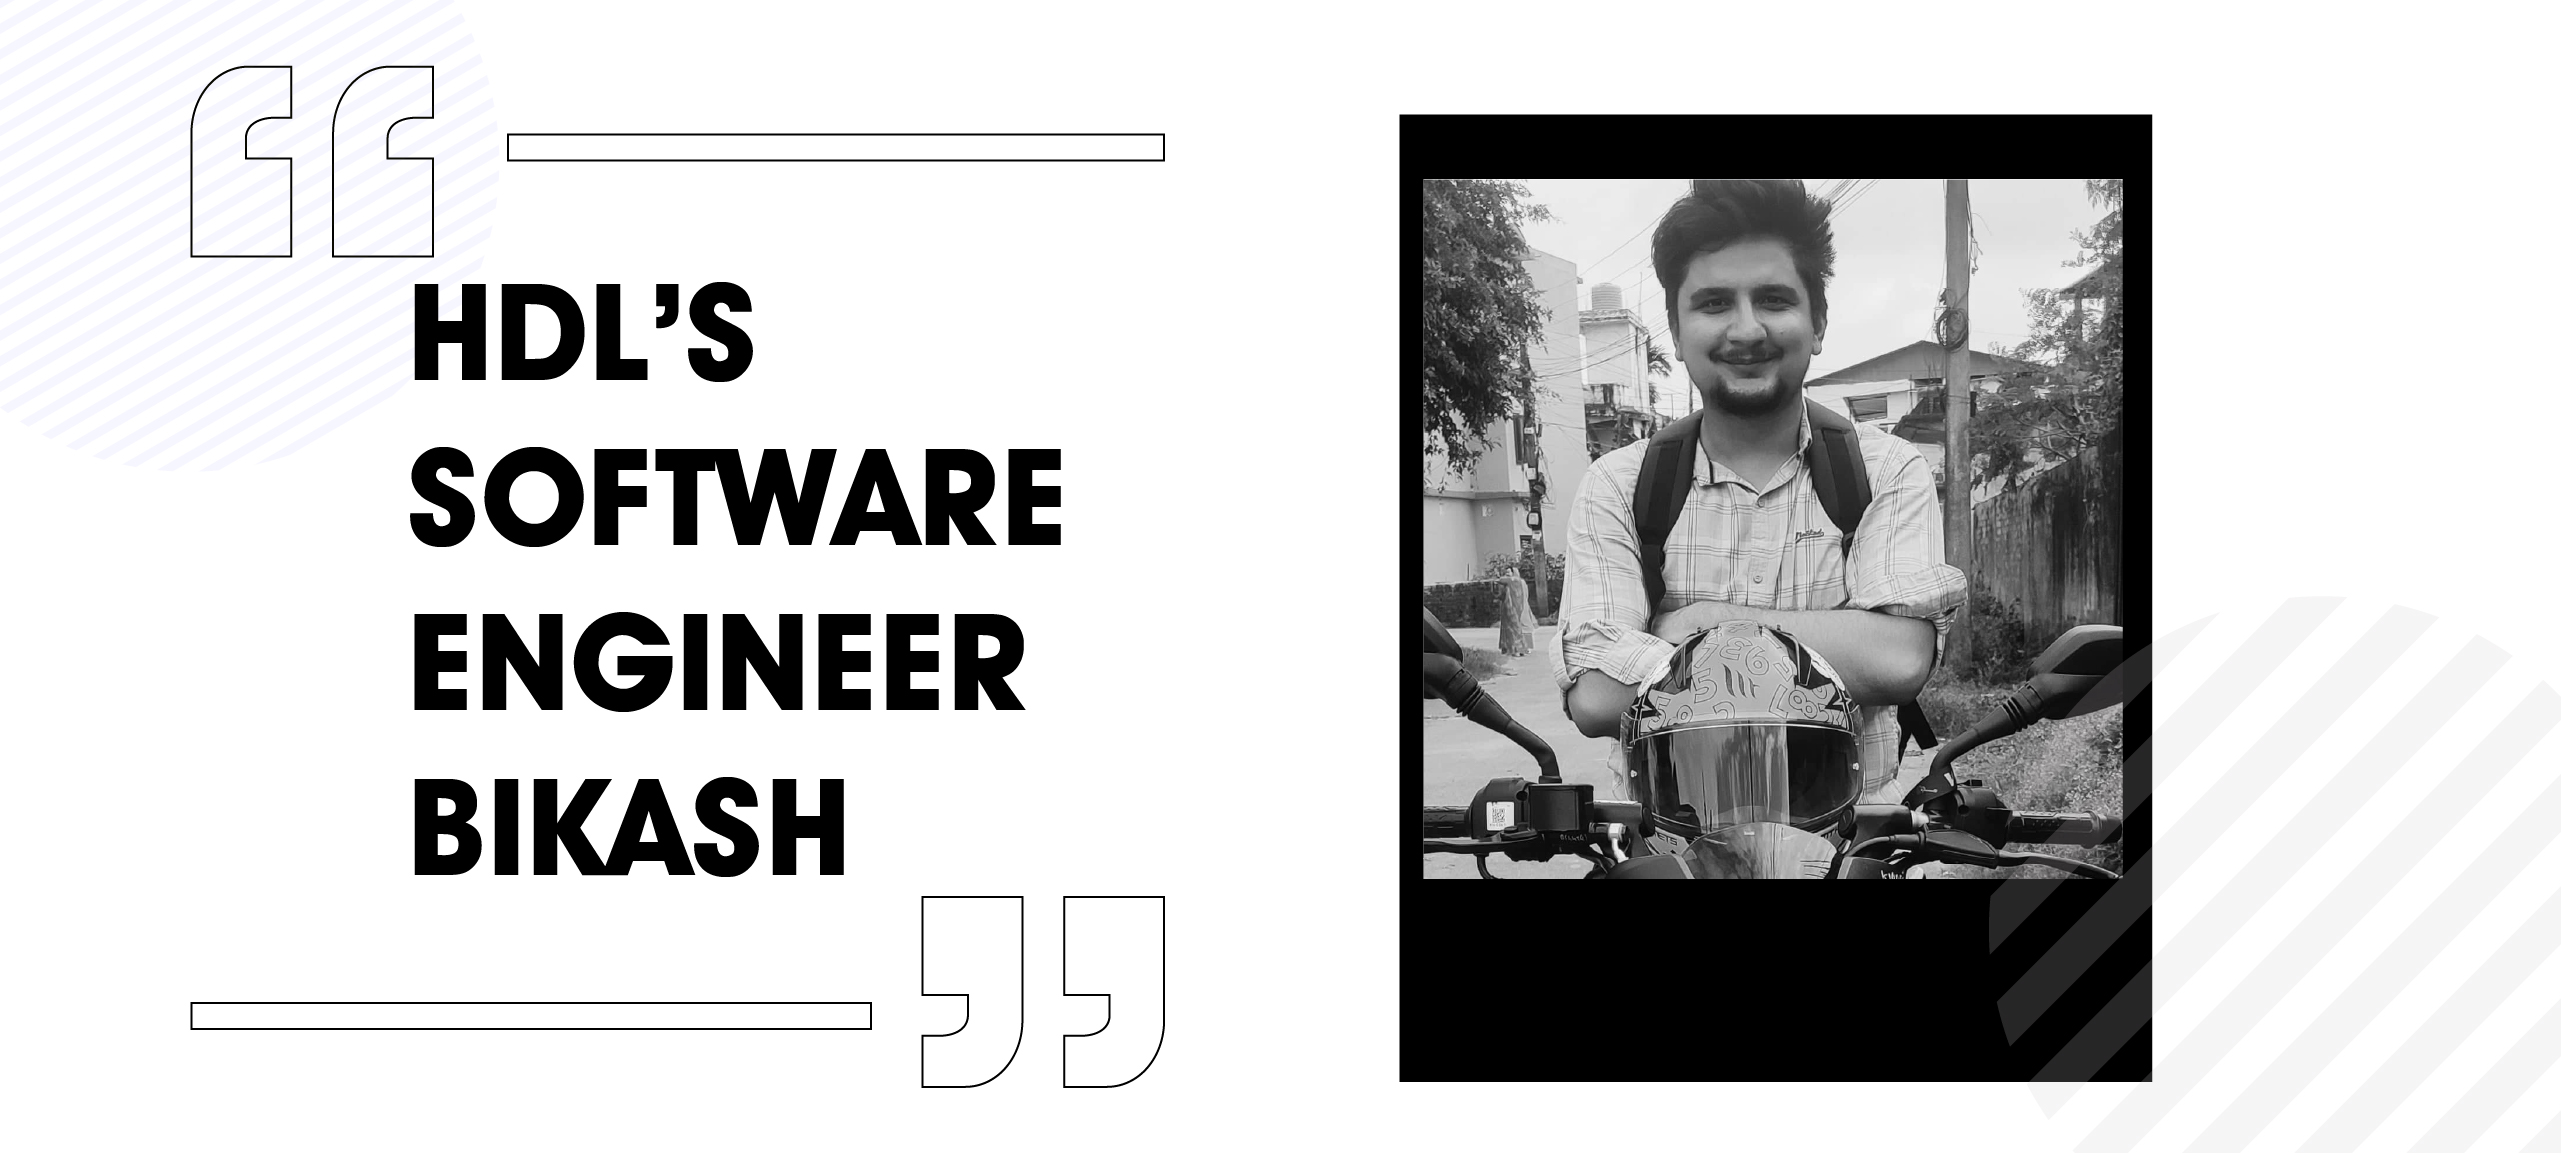 HDL's Software Engineer